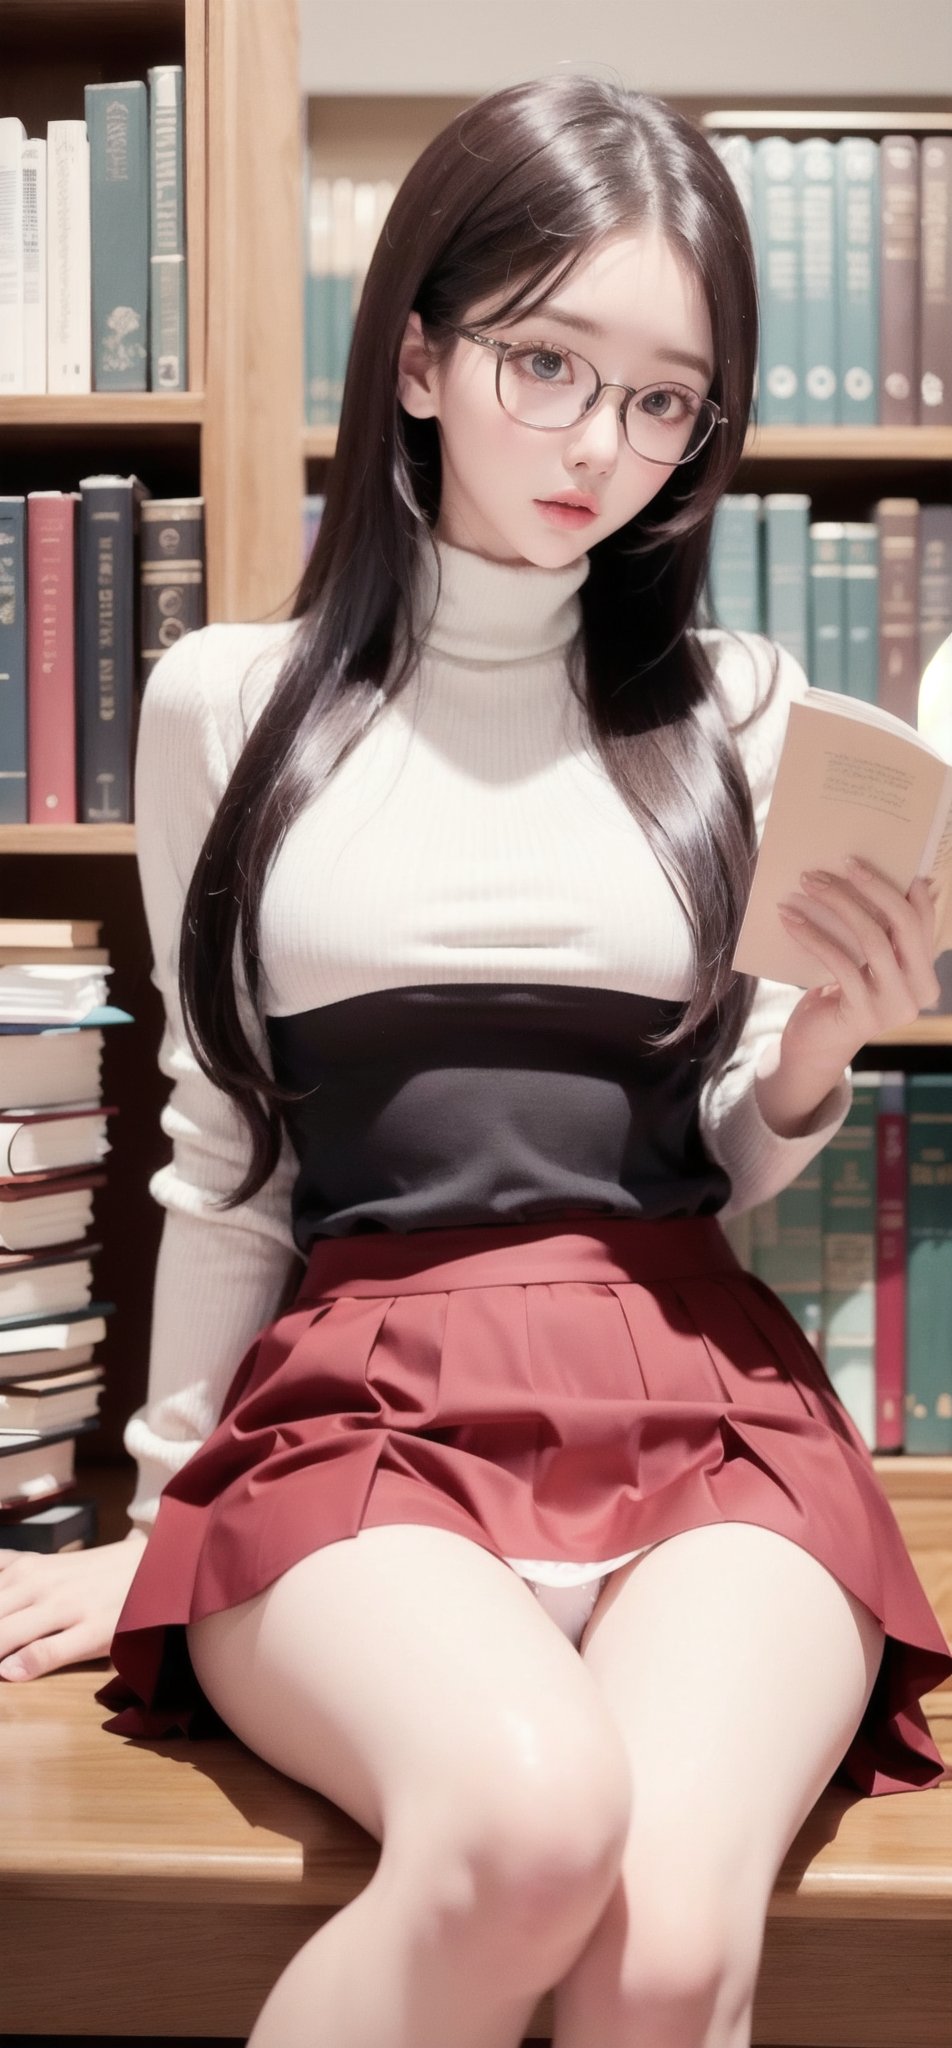 (score_9, score_8_up), score_7_up, head to hips view, tiny, slender, librarian sitting, reading a book in the dark corner of the library, eye_glasses, extra long blonde wavy hair, luxurious and voluminous, (dark red micro skirt:1.1), (white panties:1.1), pov,